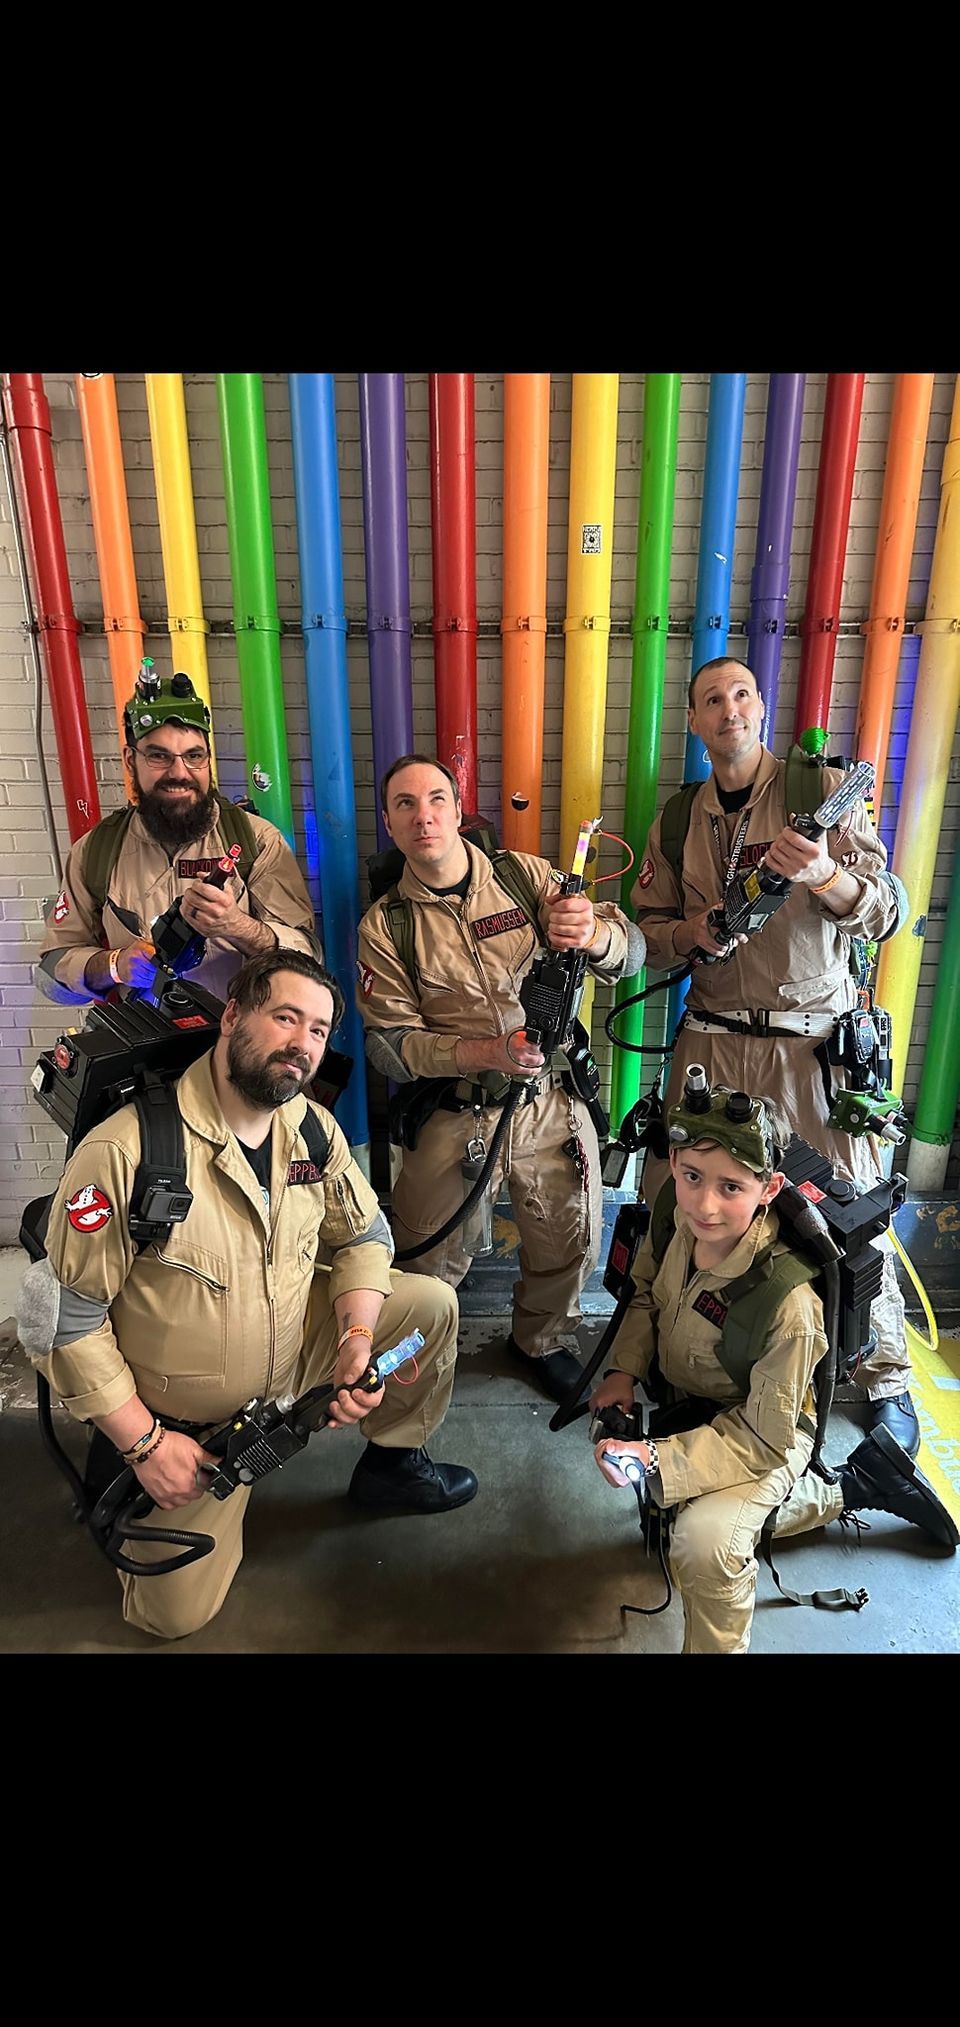 Nomad Ghostbusters at 2dcon